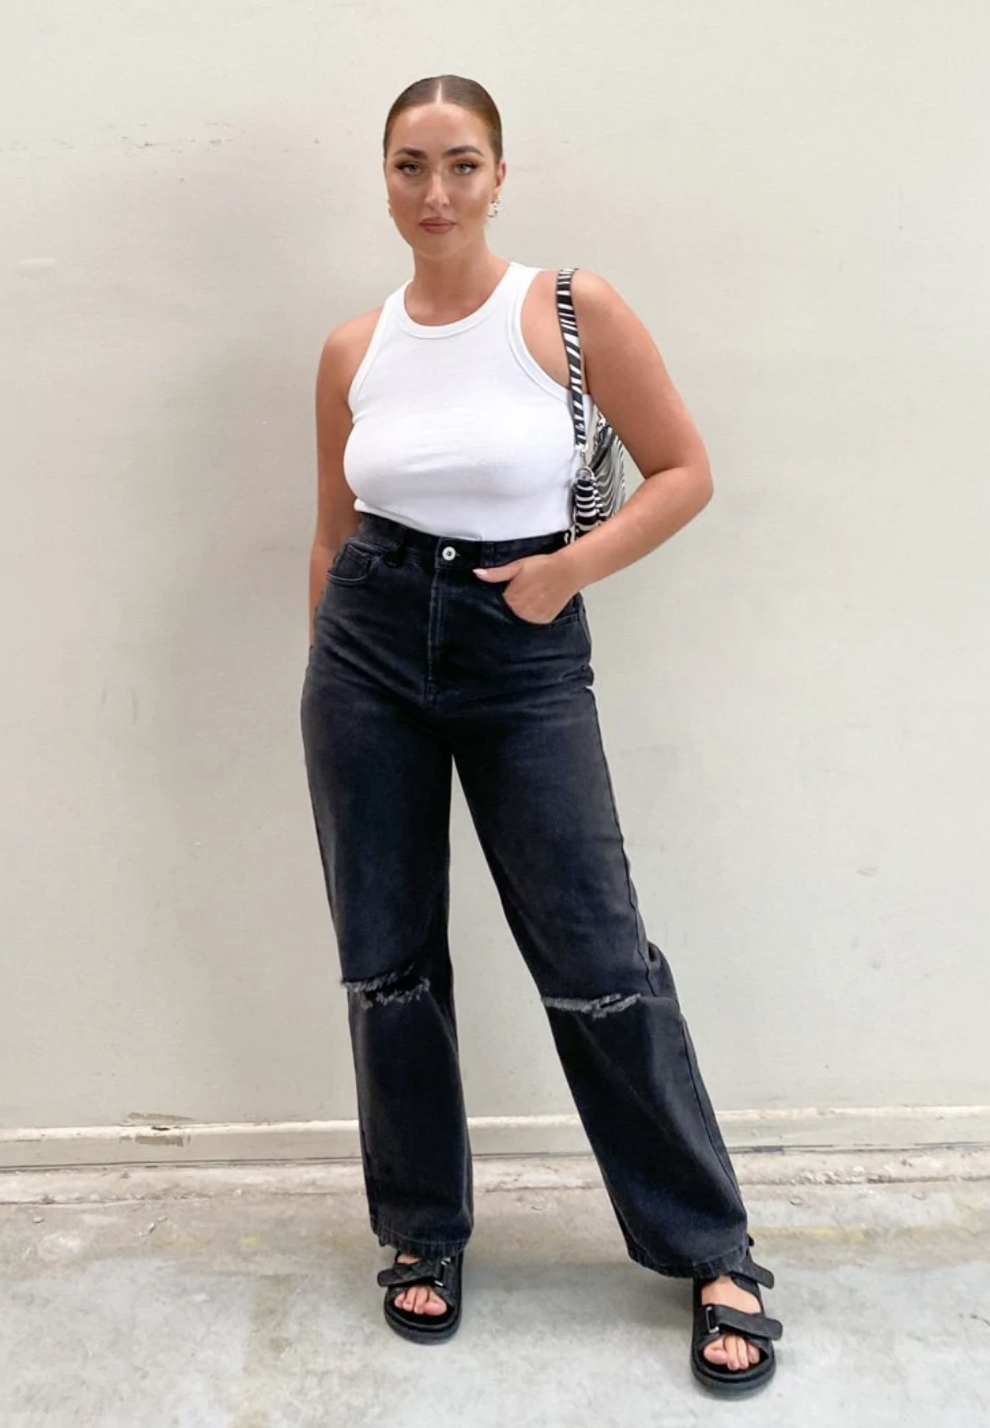 28 Best Wide-Leg Jeans That Fit Like A Dream 2022